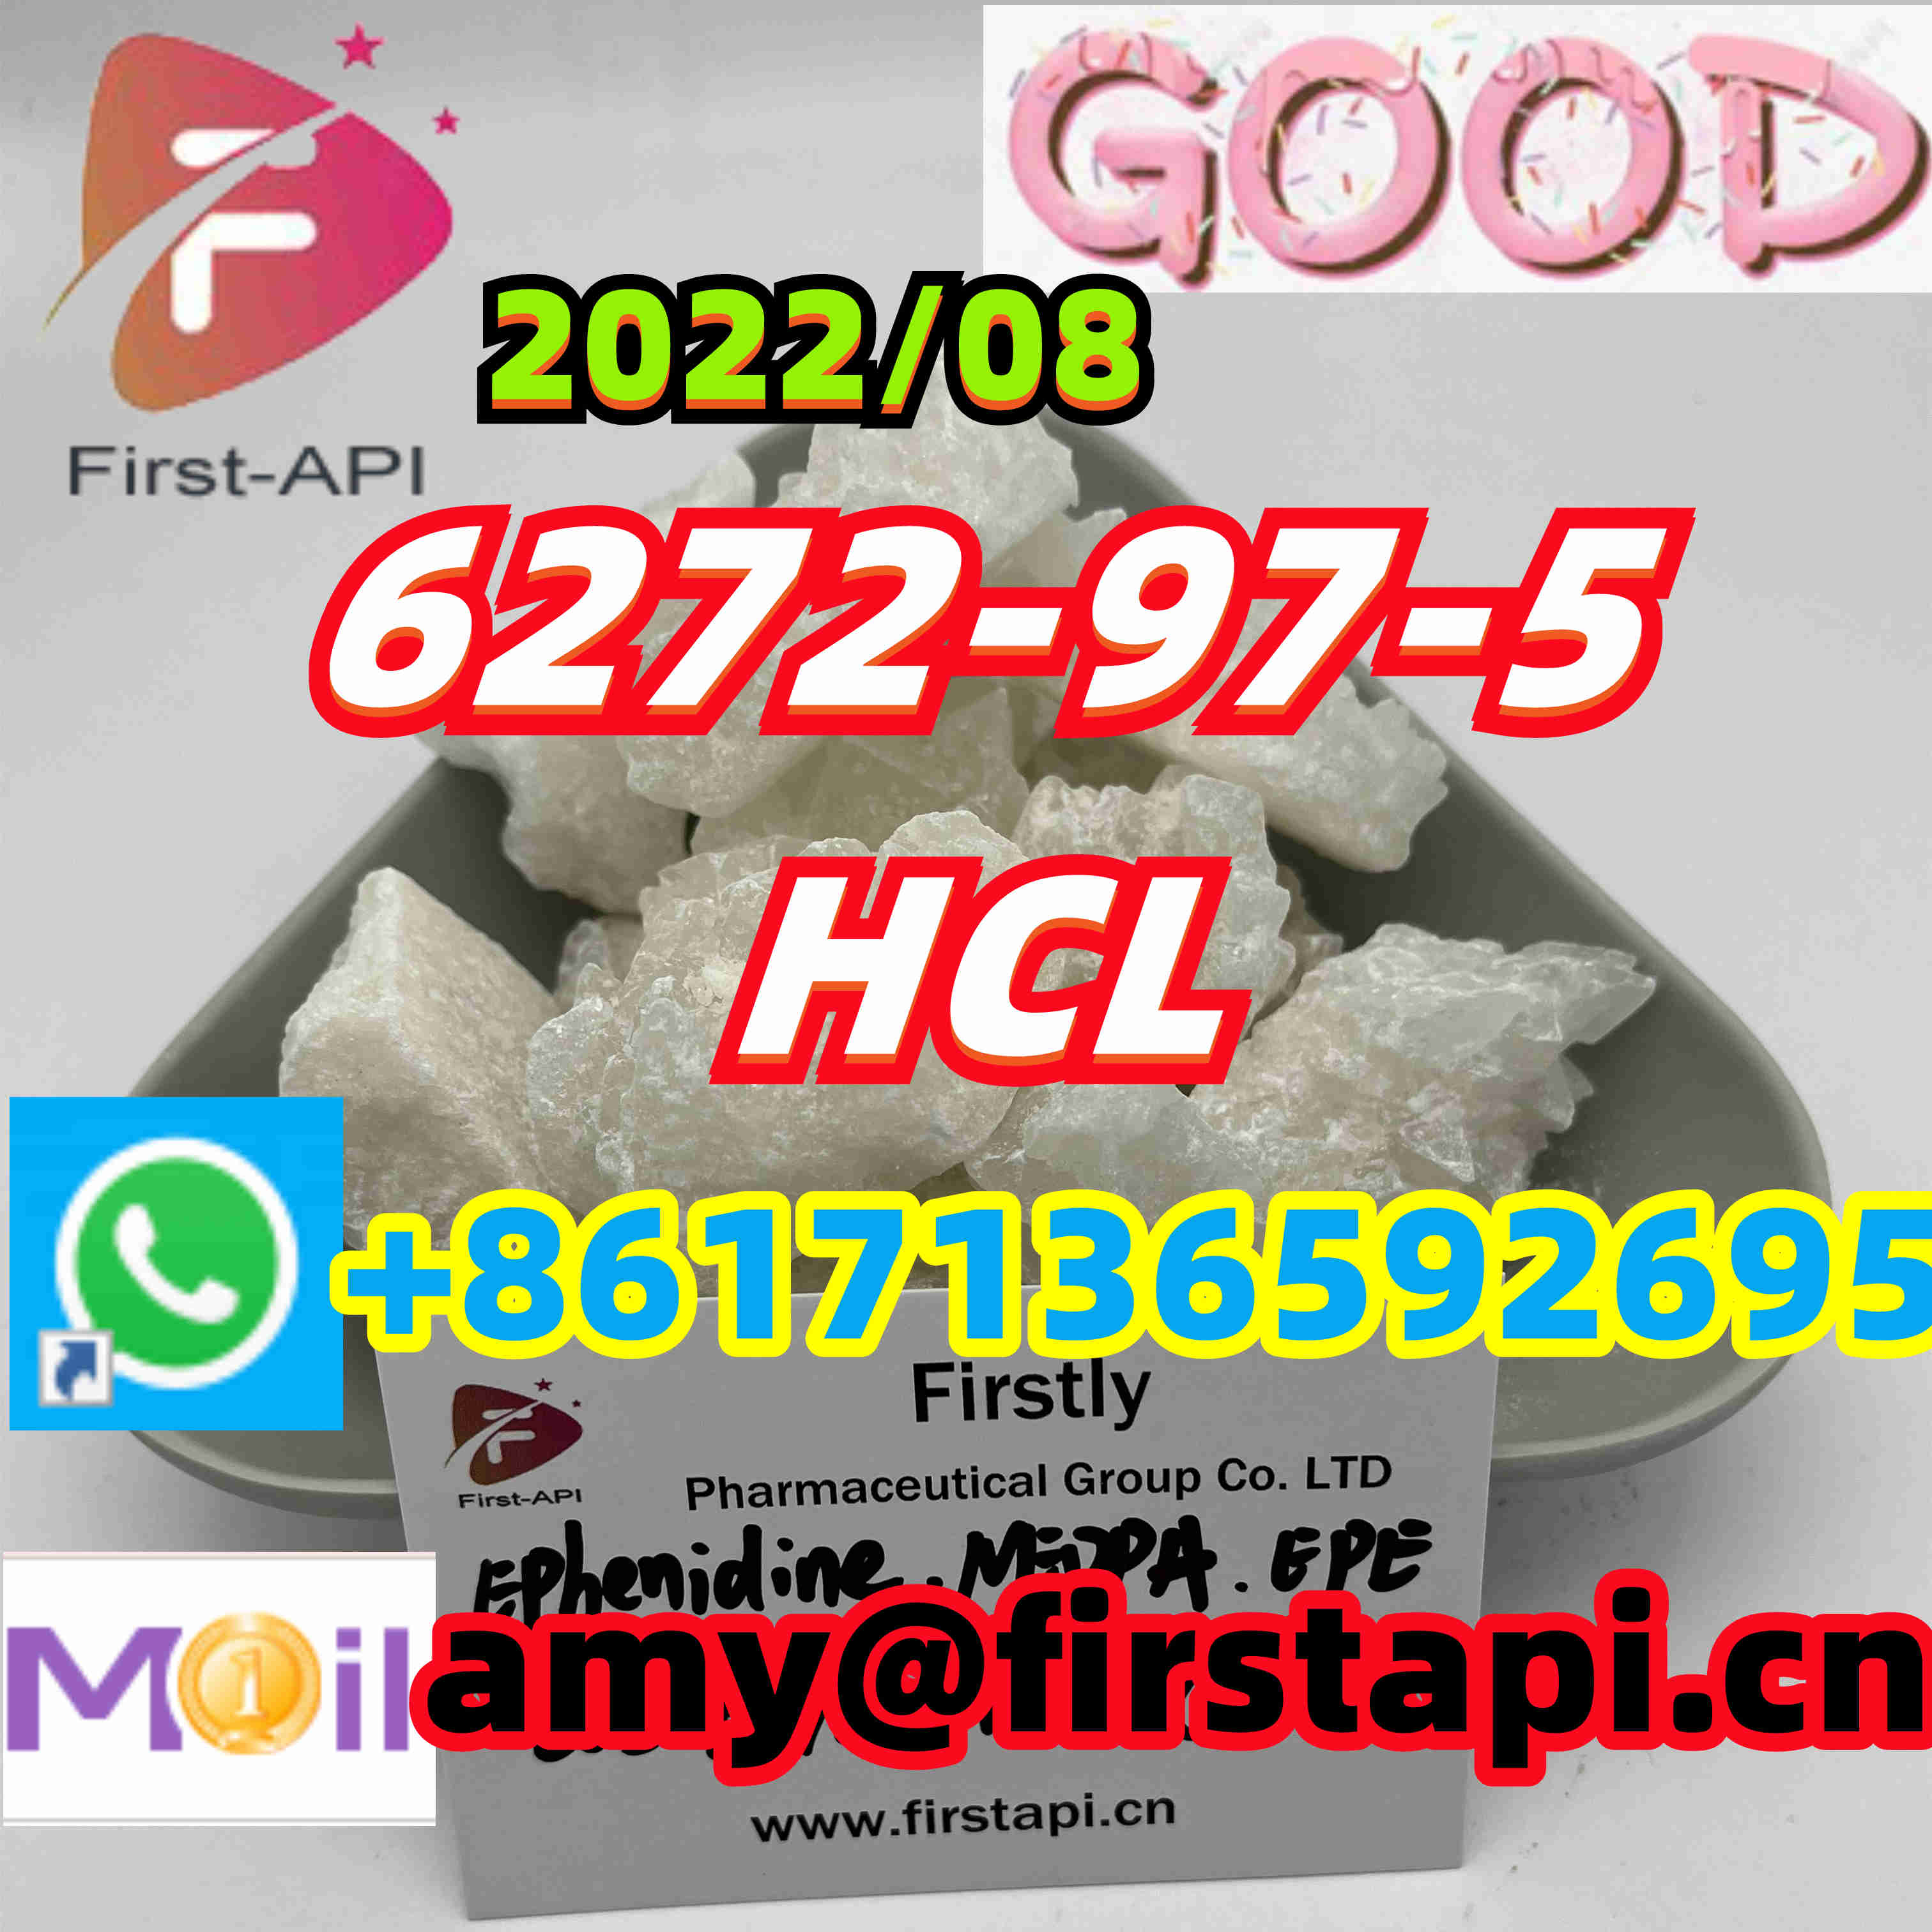 High quality,low price,CAS No.:6272-97-5,Ephenidine (HCL),made in china - photo